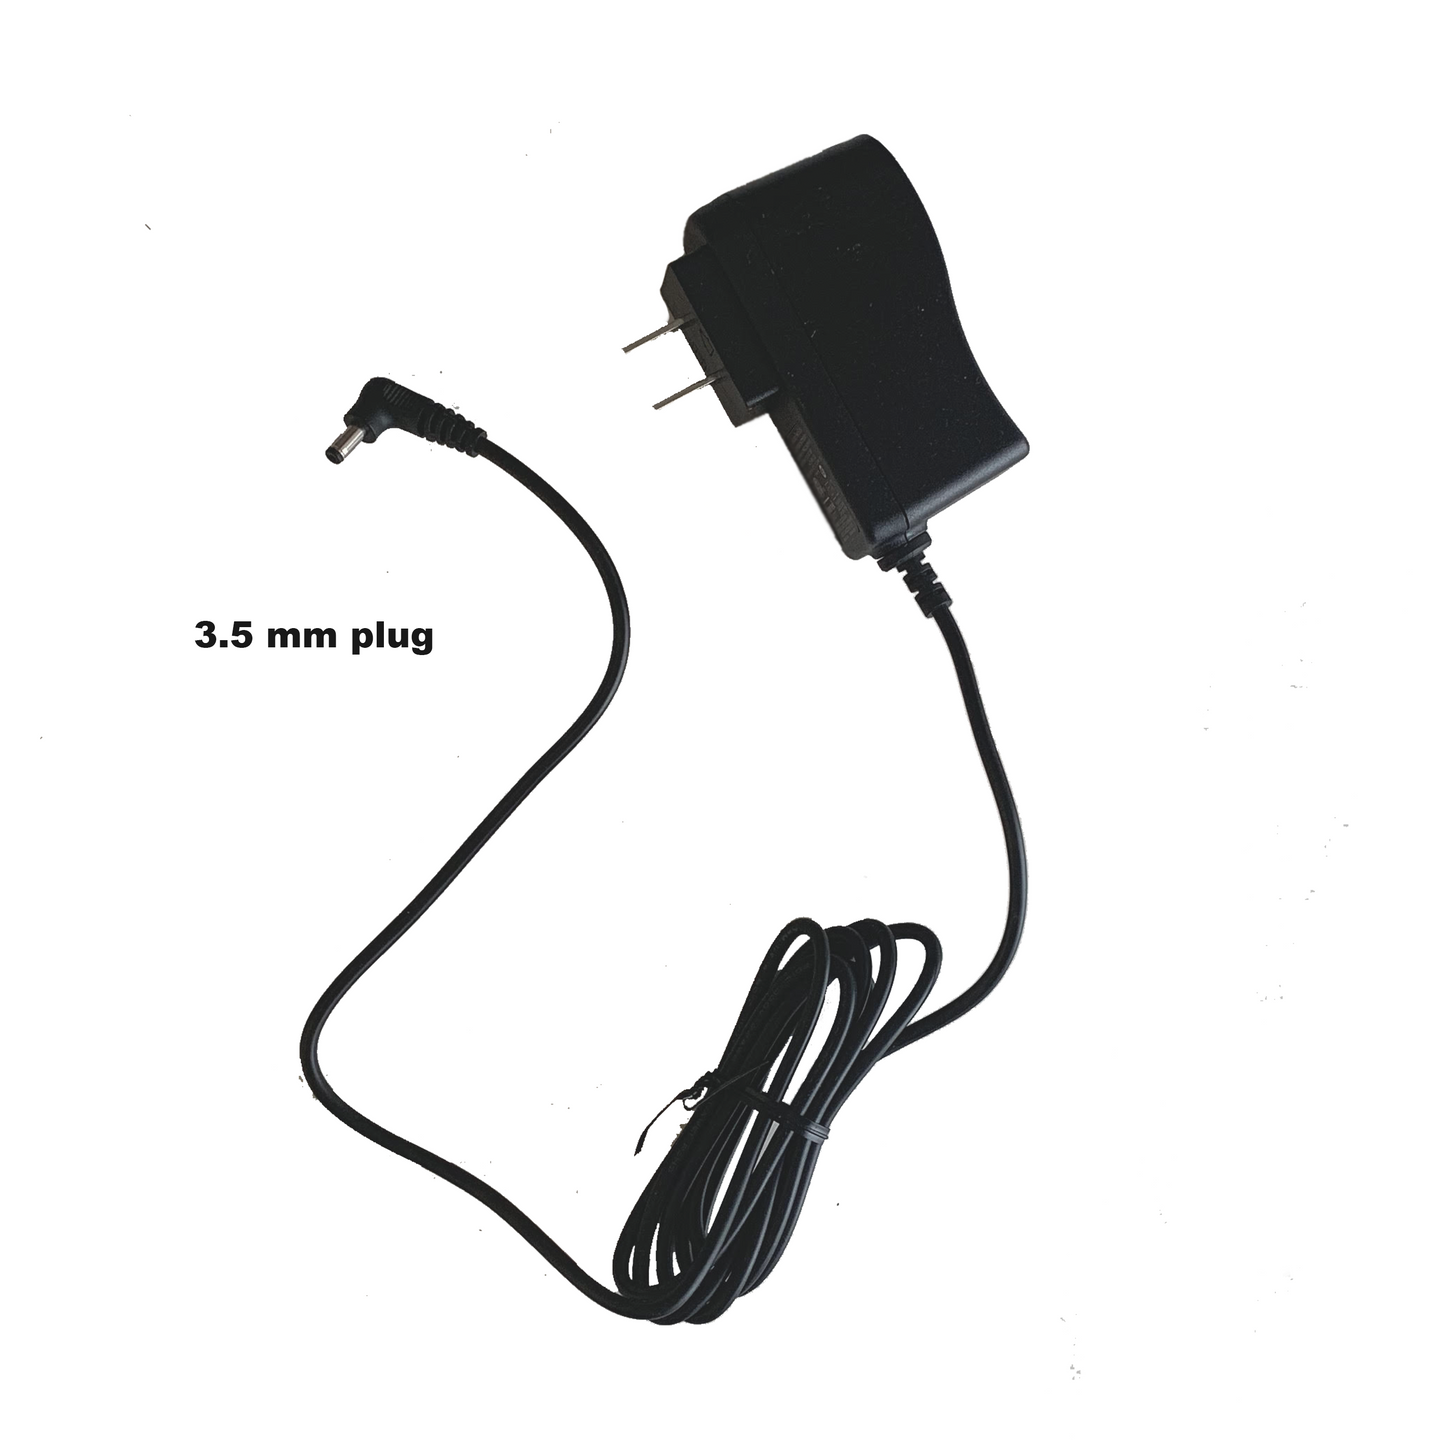 Original AC Charger for Luna Max RCA / Venturer 14" Android Tablets (Buy 2 or more get 30% discount)